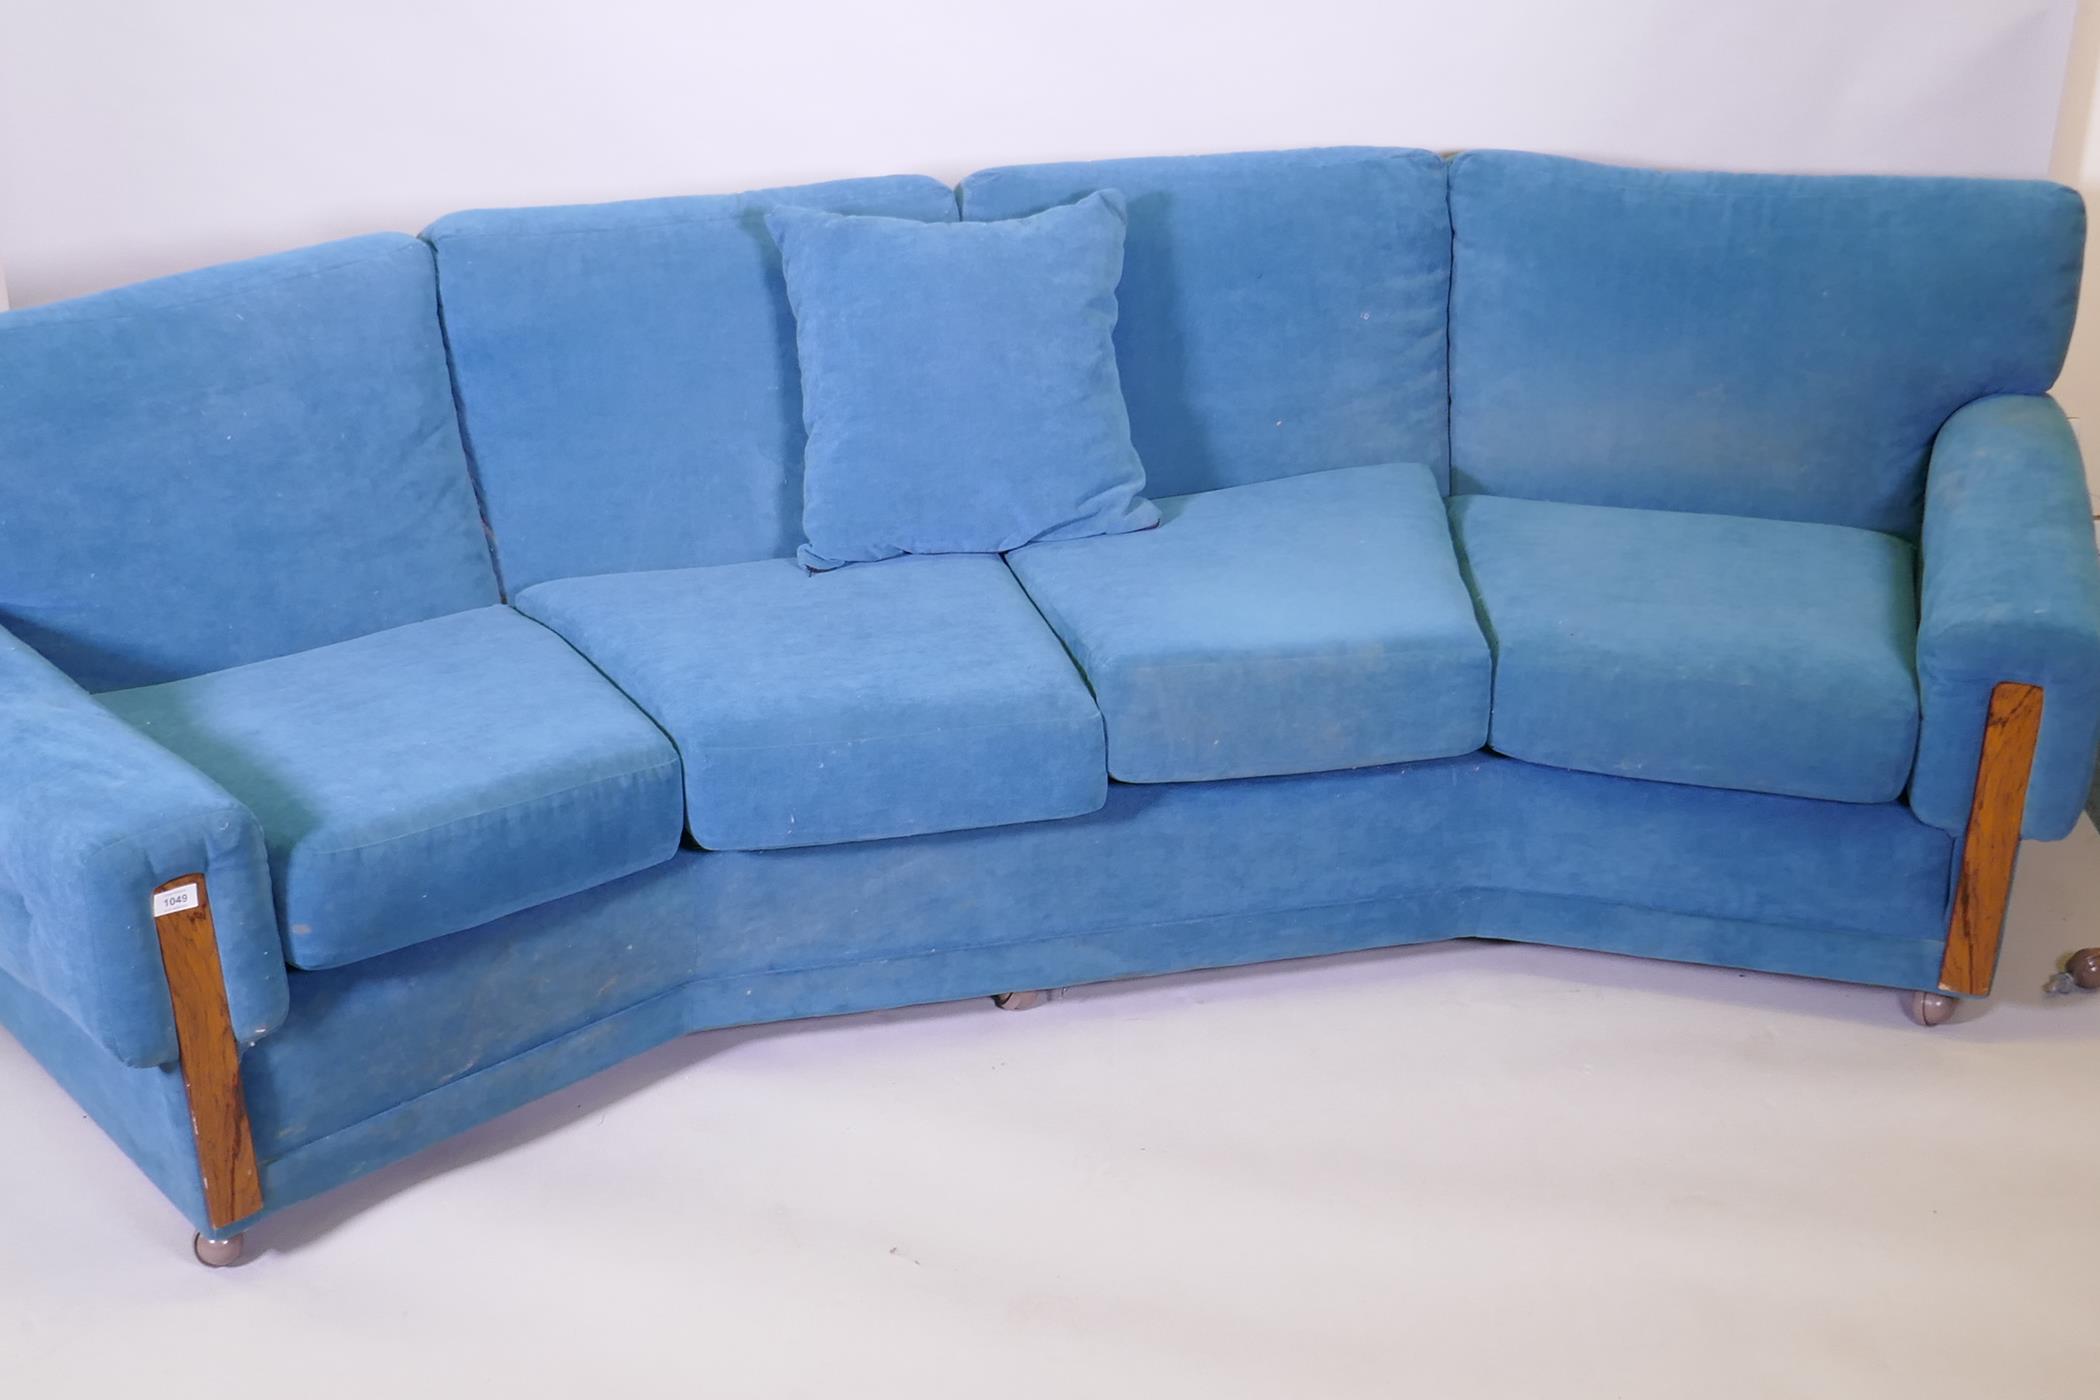 A G-Plan Re-form group four seater canted sofa, 260cm wide - Image 2 of 5